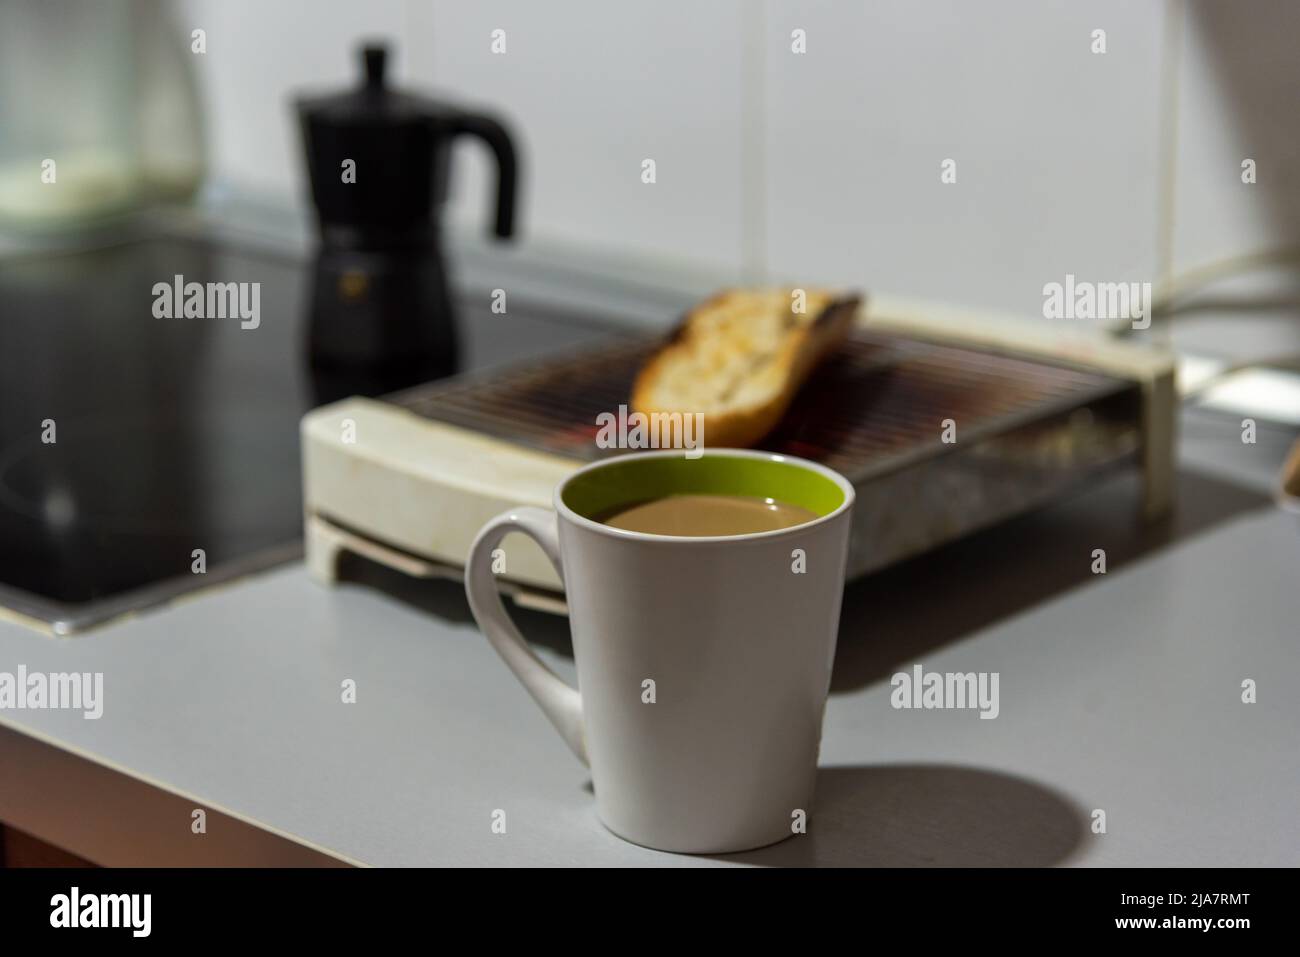 https://c8.alamy.com/comp/2JA7RMT/cup-of-coffee-with-milk-on-the-kitchen-counter-2JA7RMT.jpg